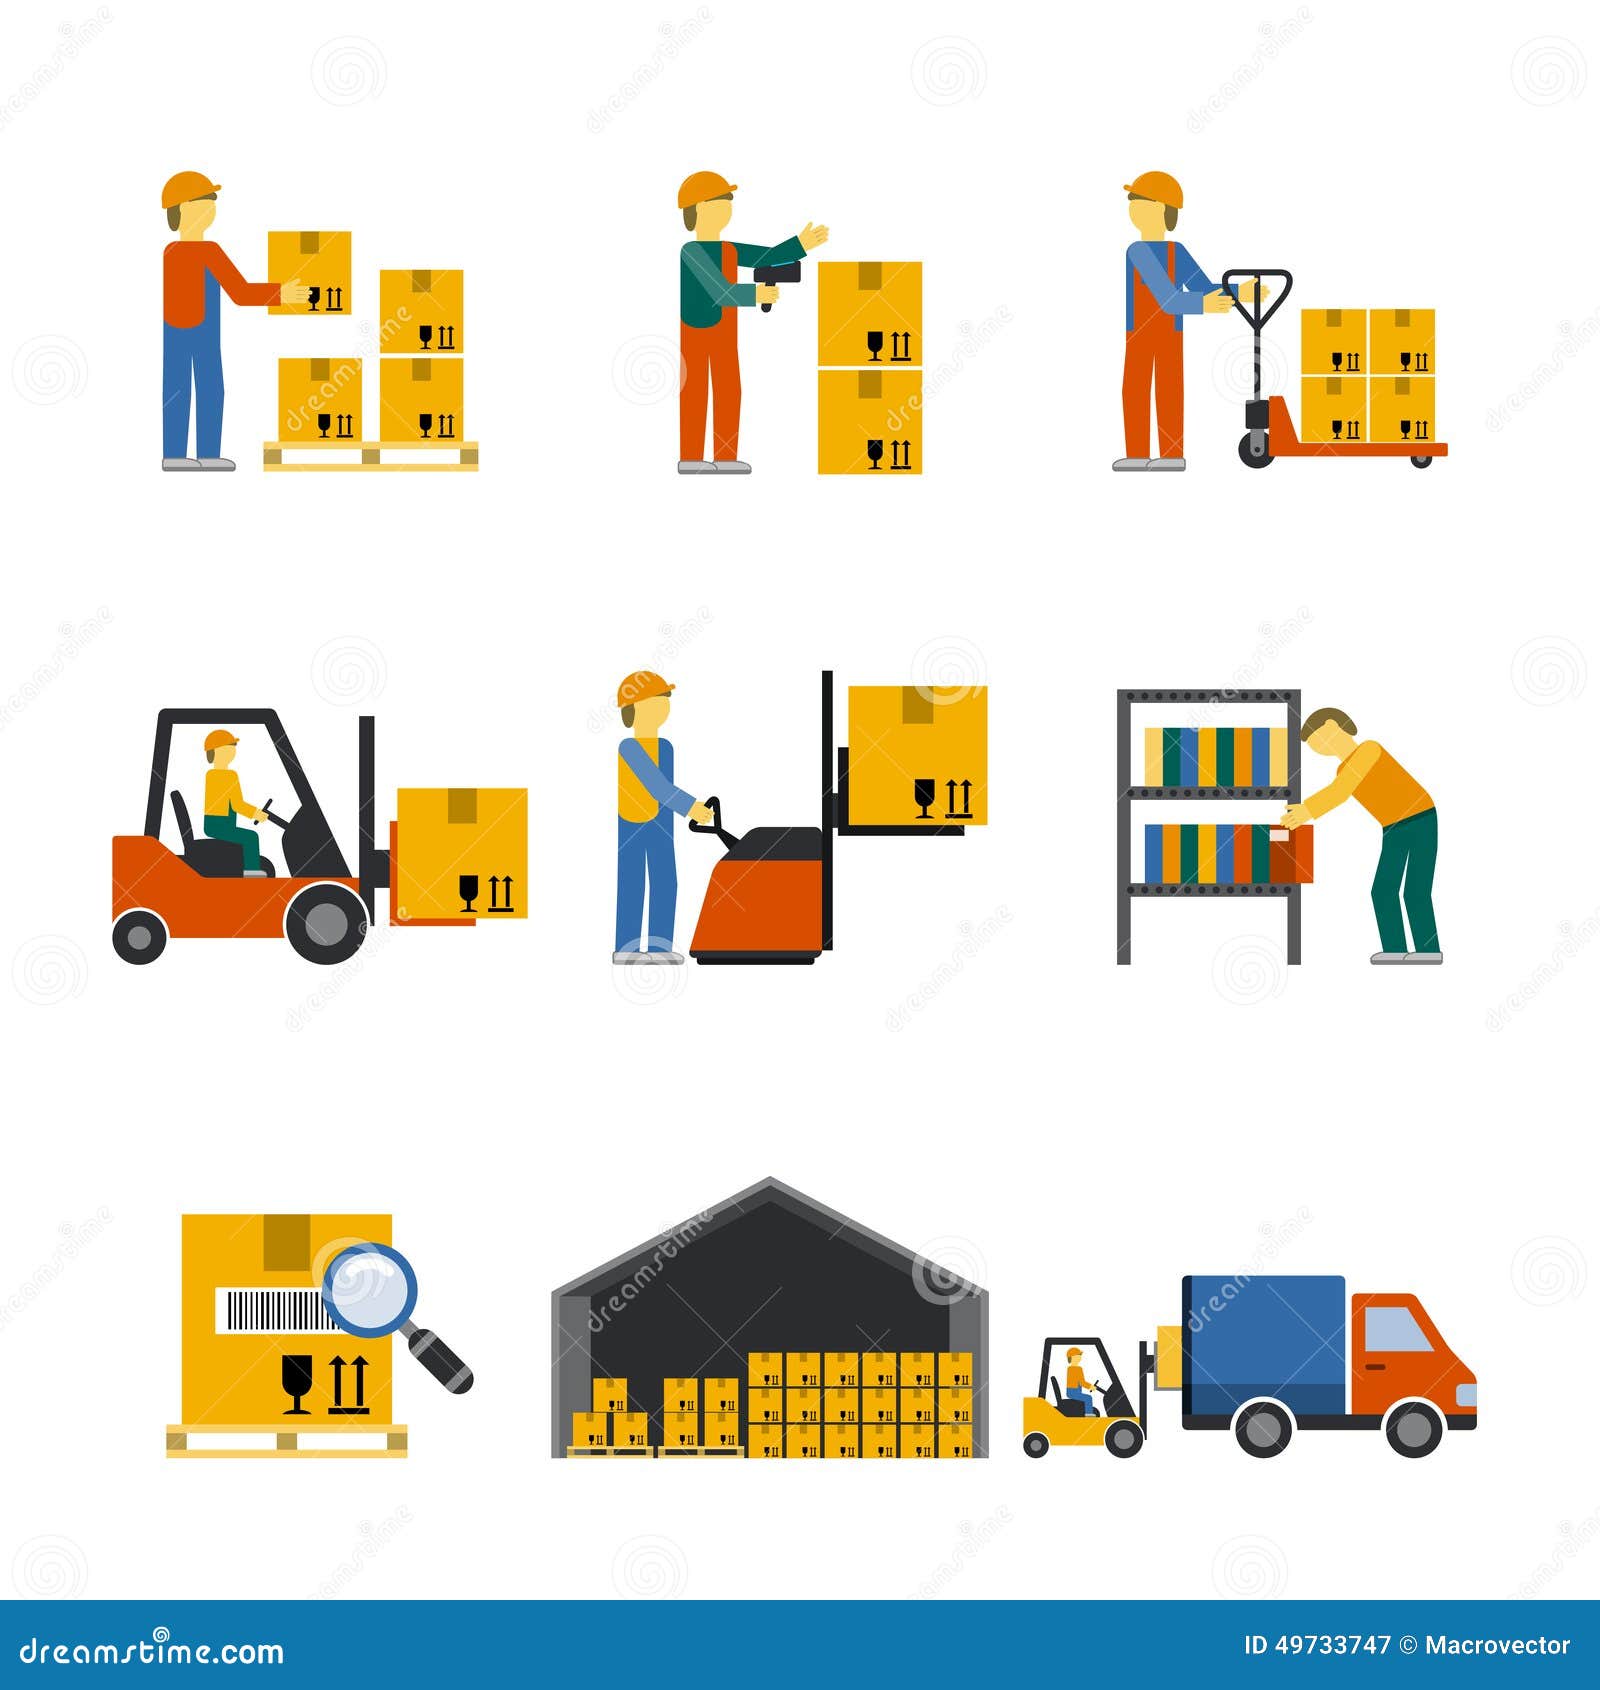 warehouse worker clipart - photo #13